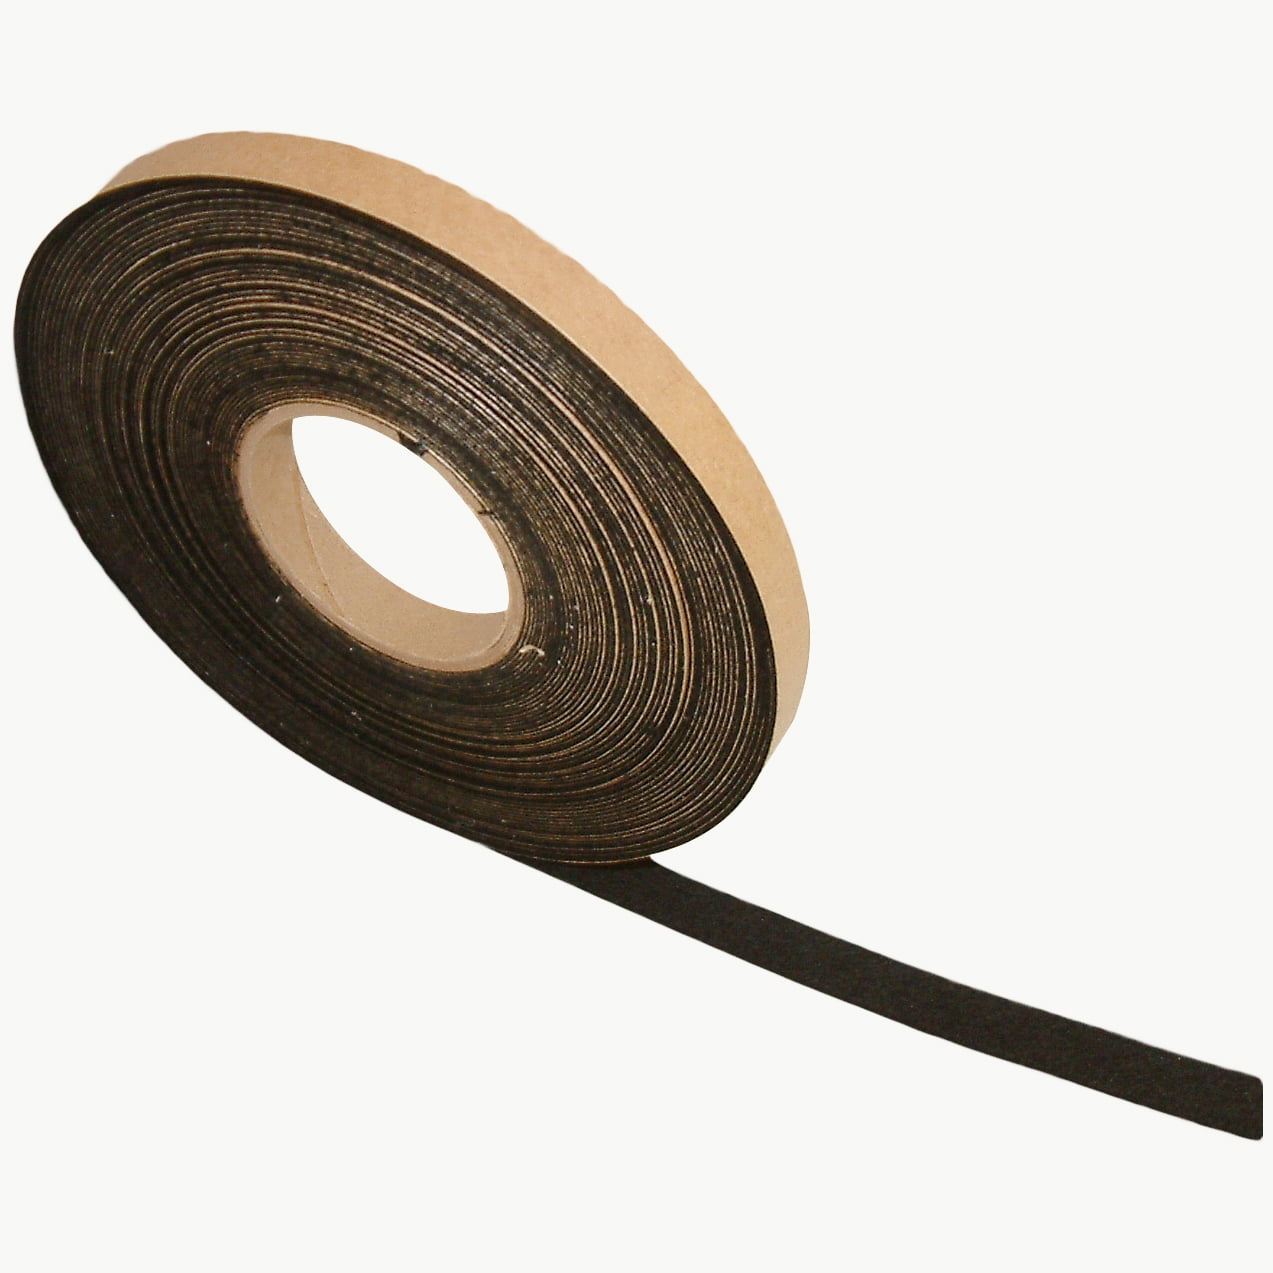 Felt Strips With Adhesive Backing Self-stick Heavy Duty Felt Tapes on OnBuy